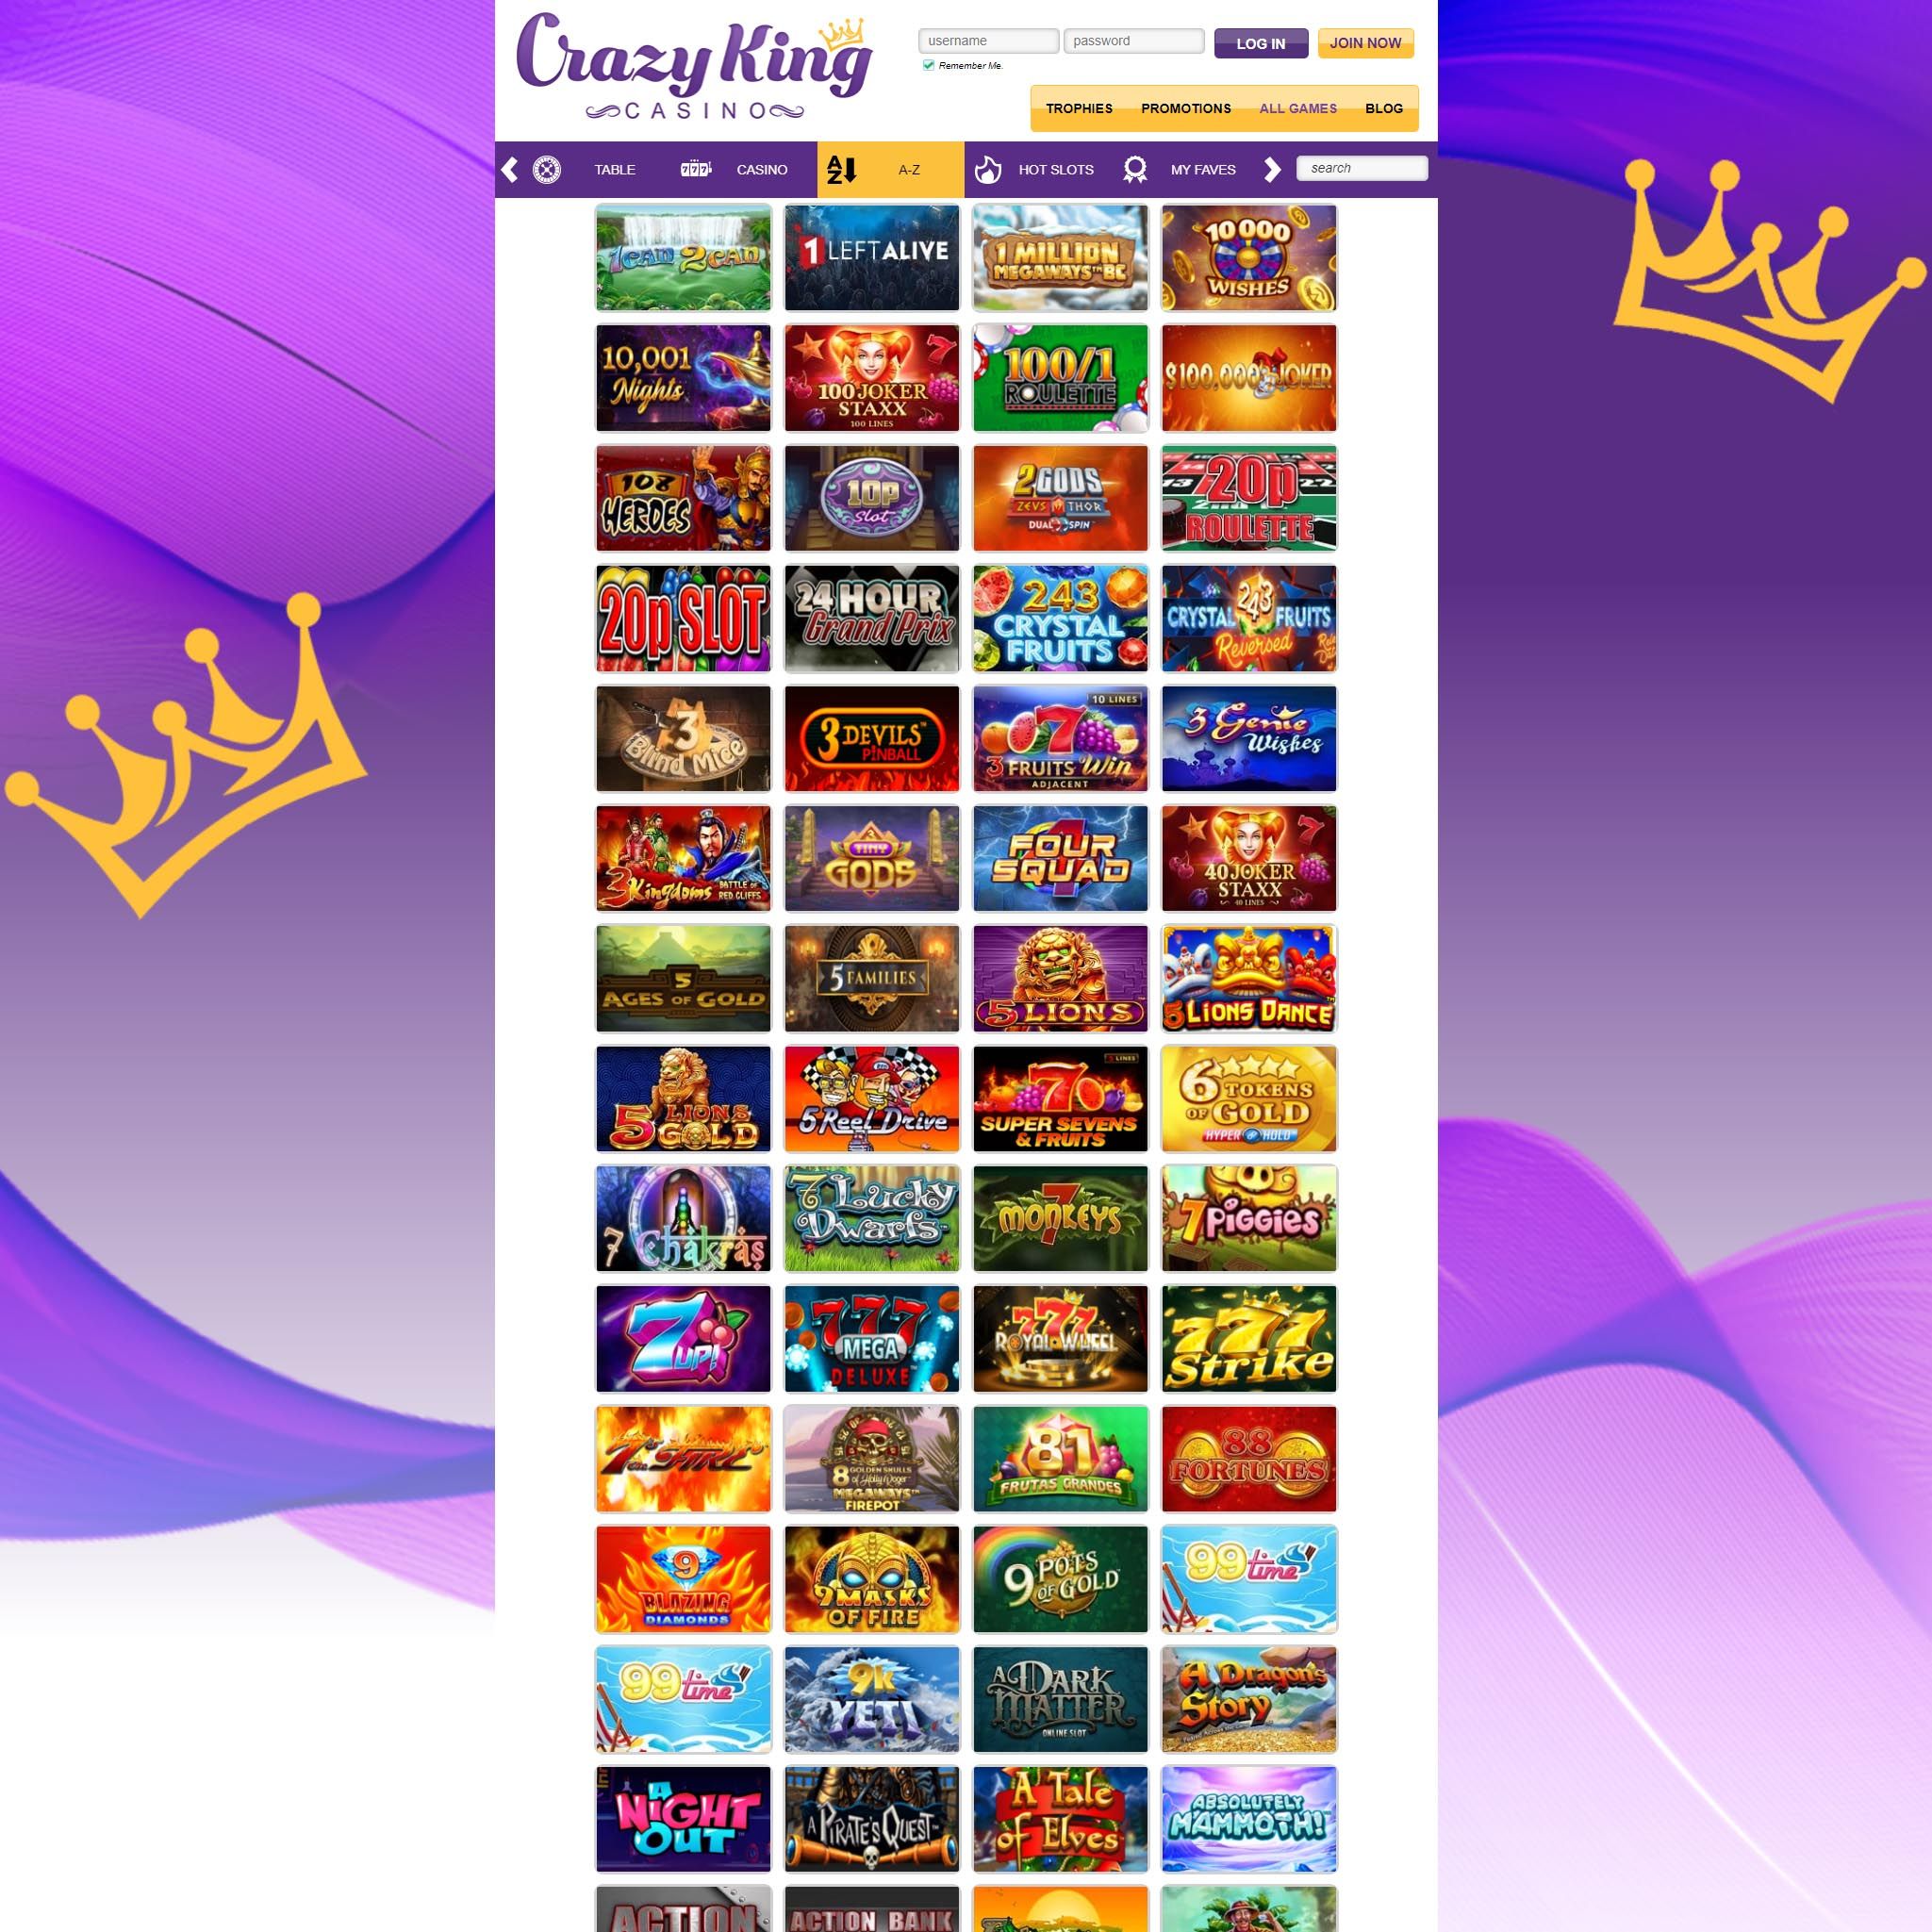 Crazy King Casino review by Mr. Gamble